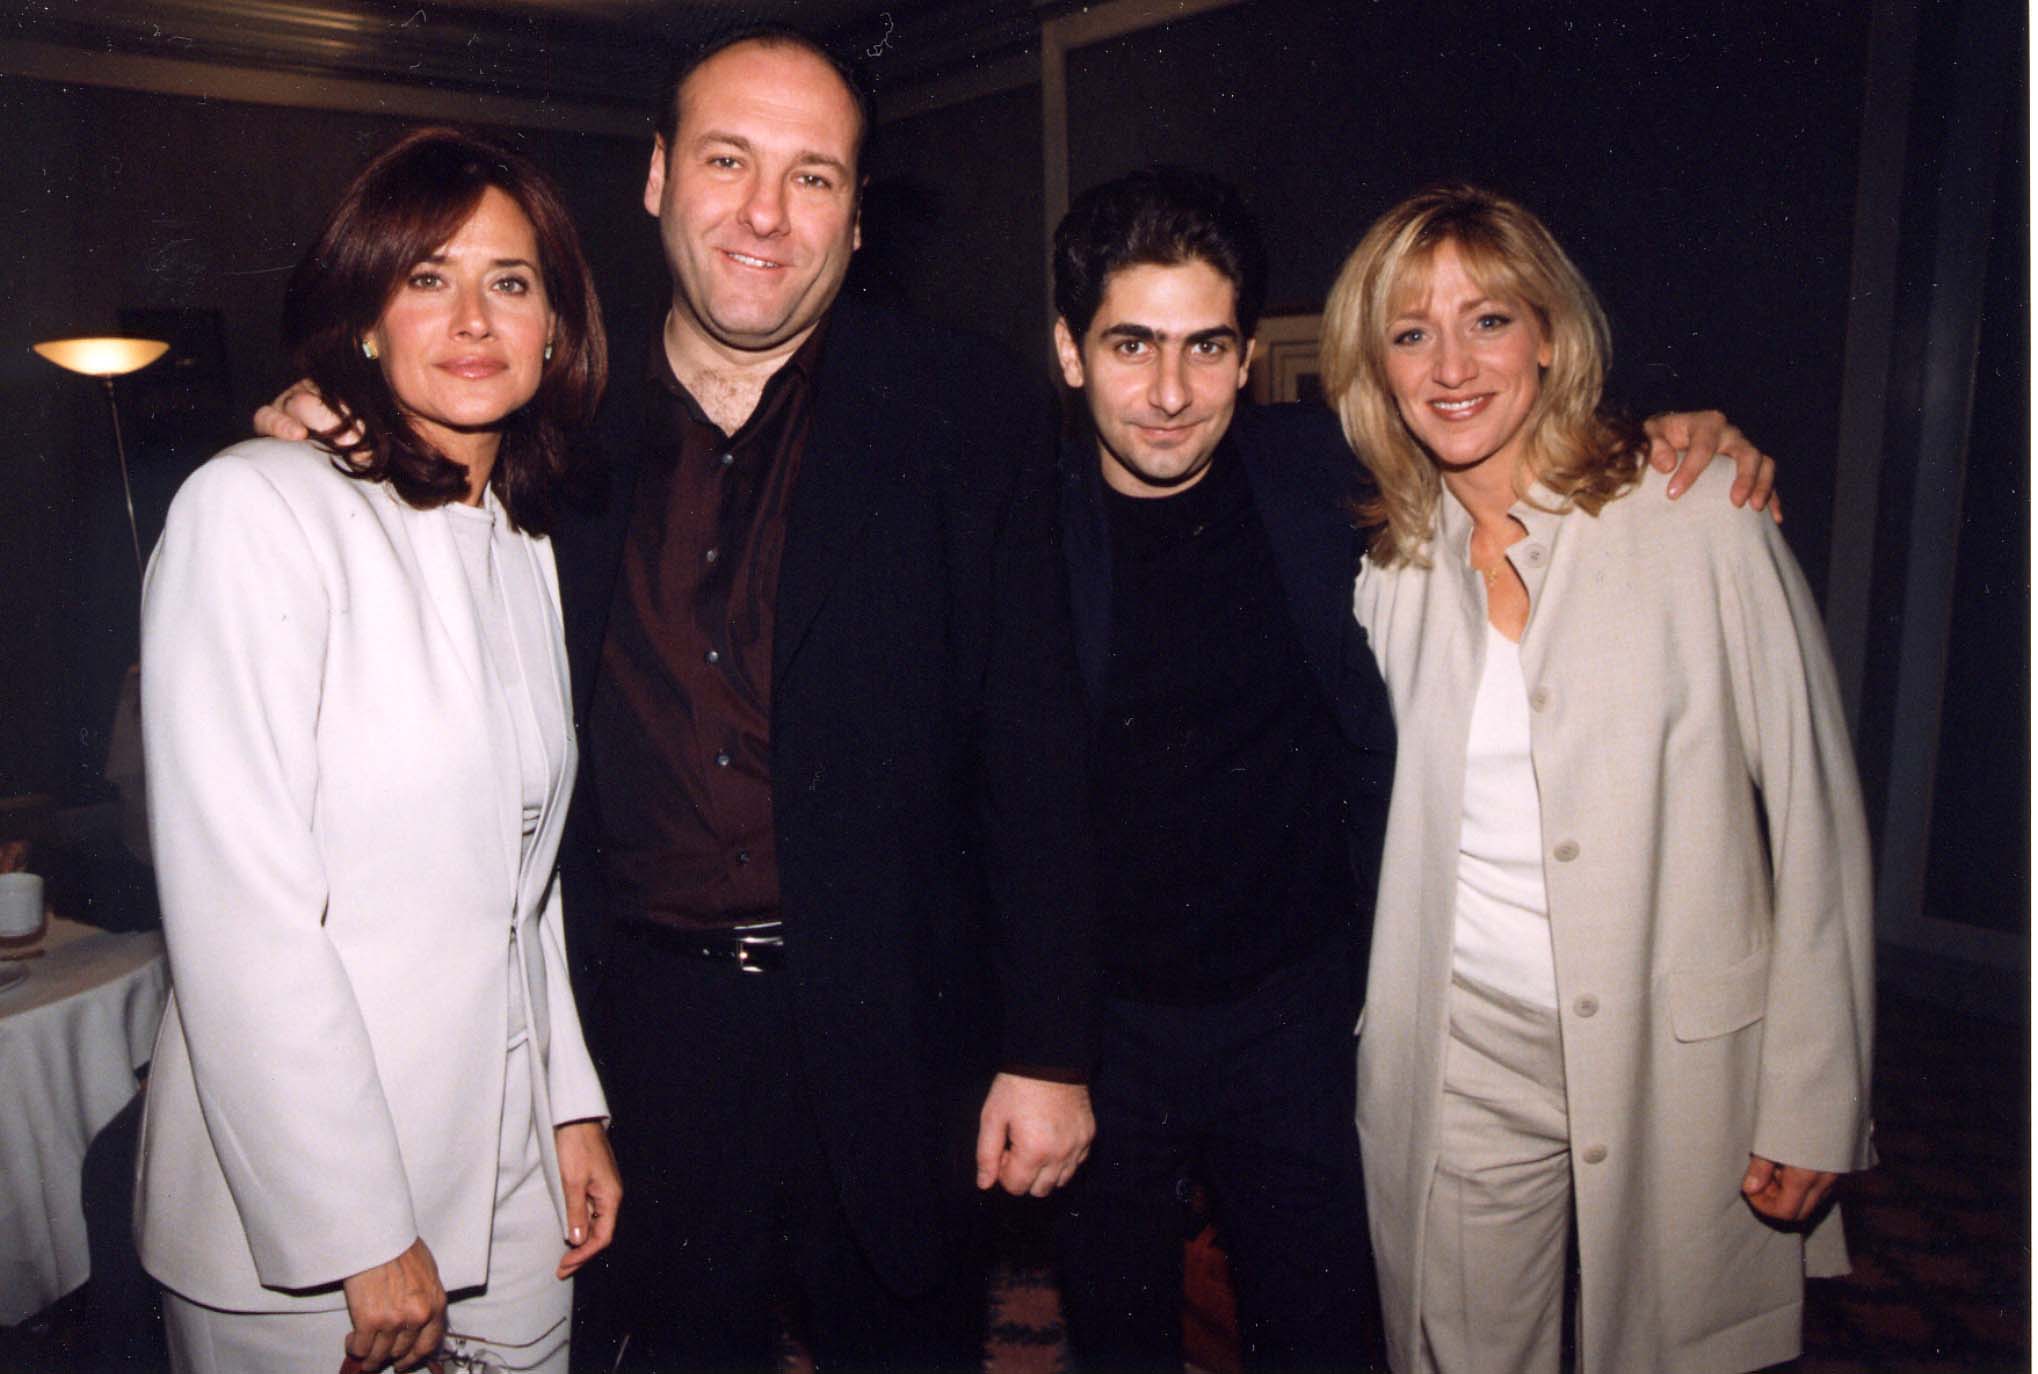 'The Sopranos' lead actors posing together